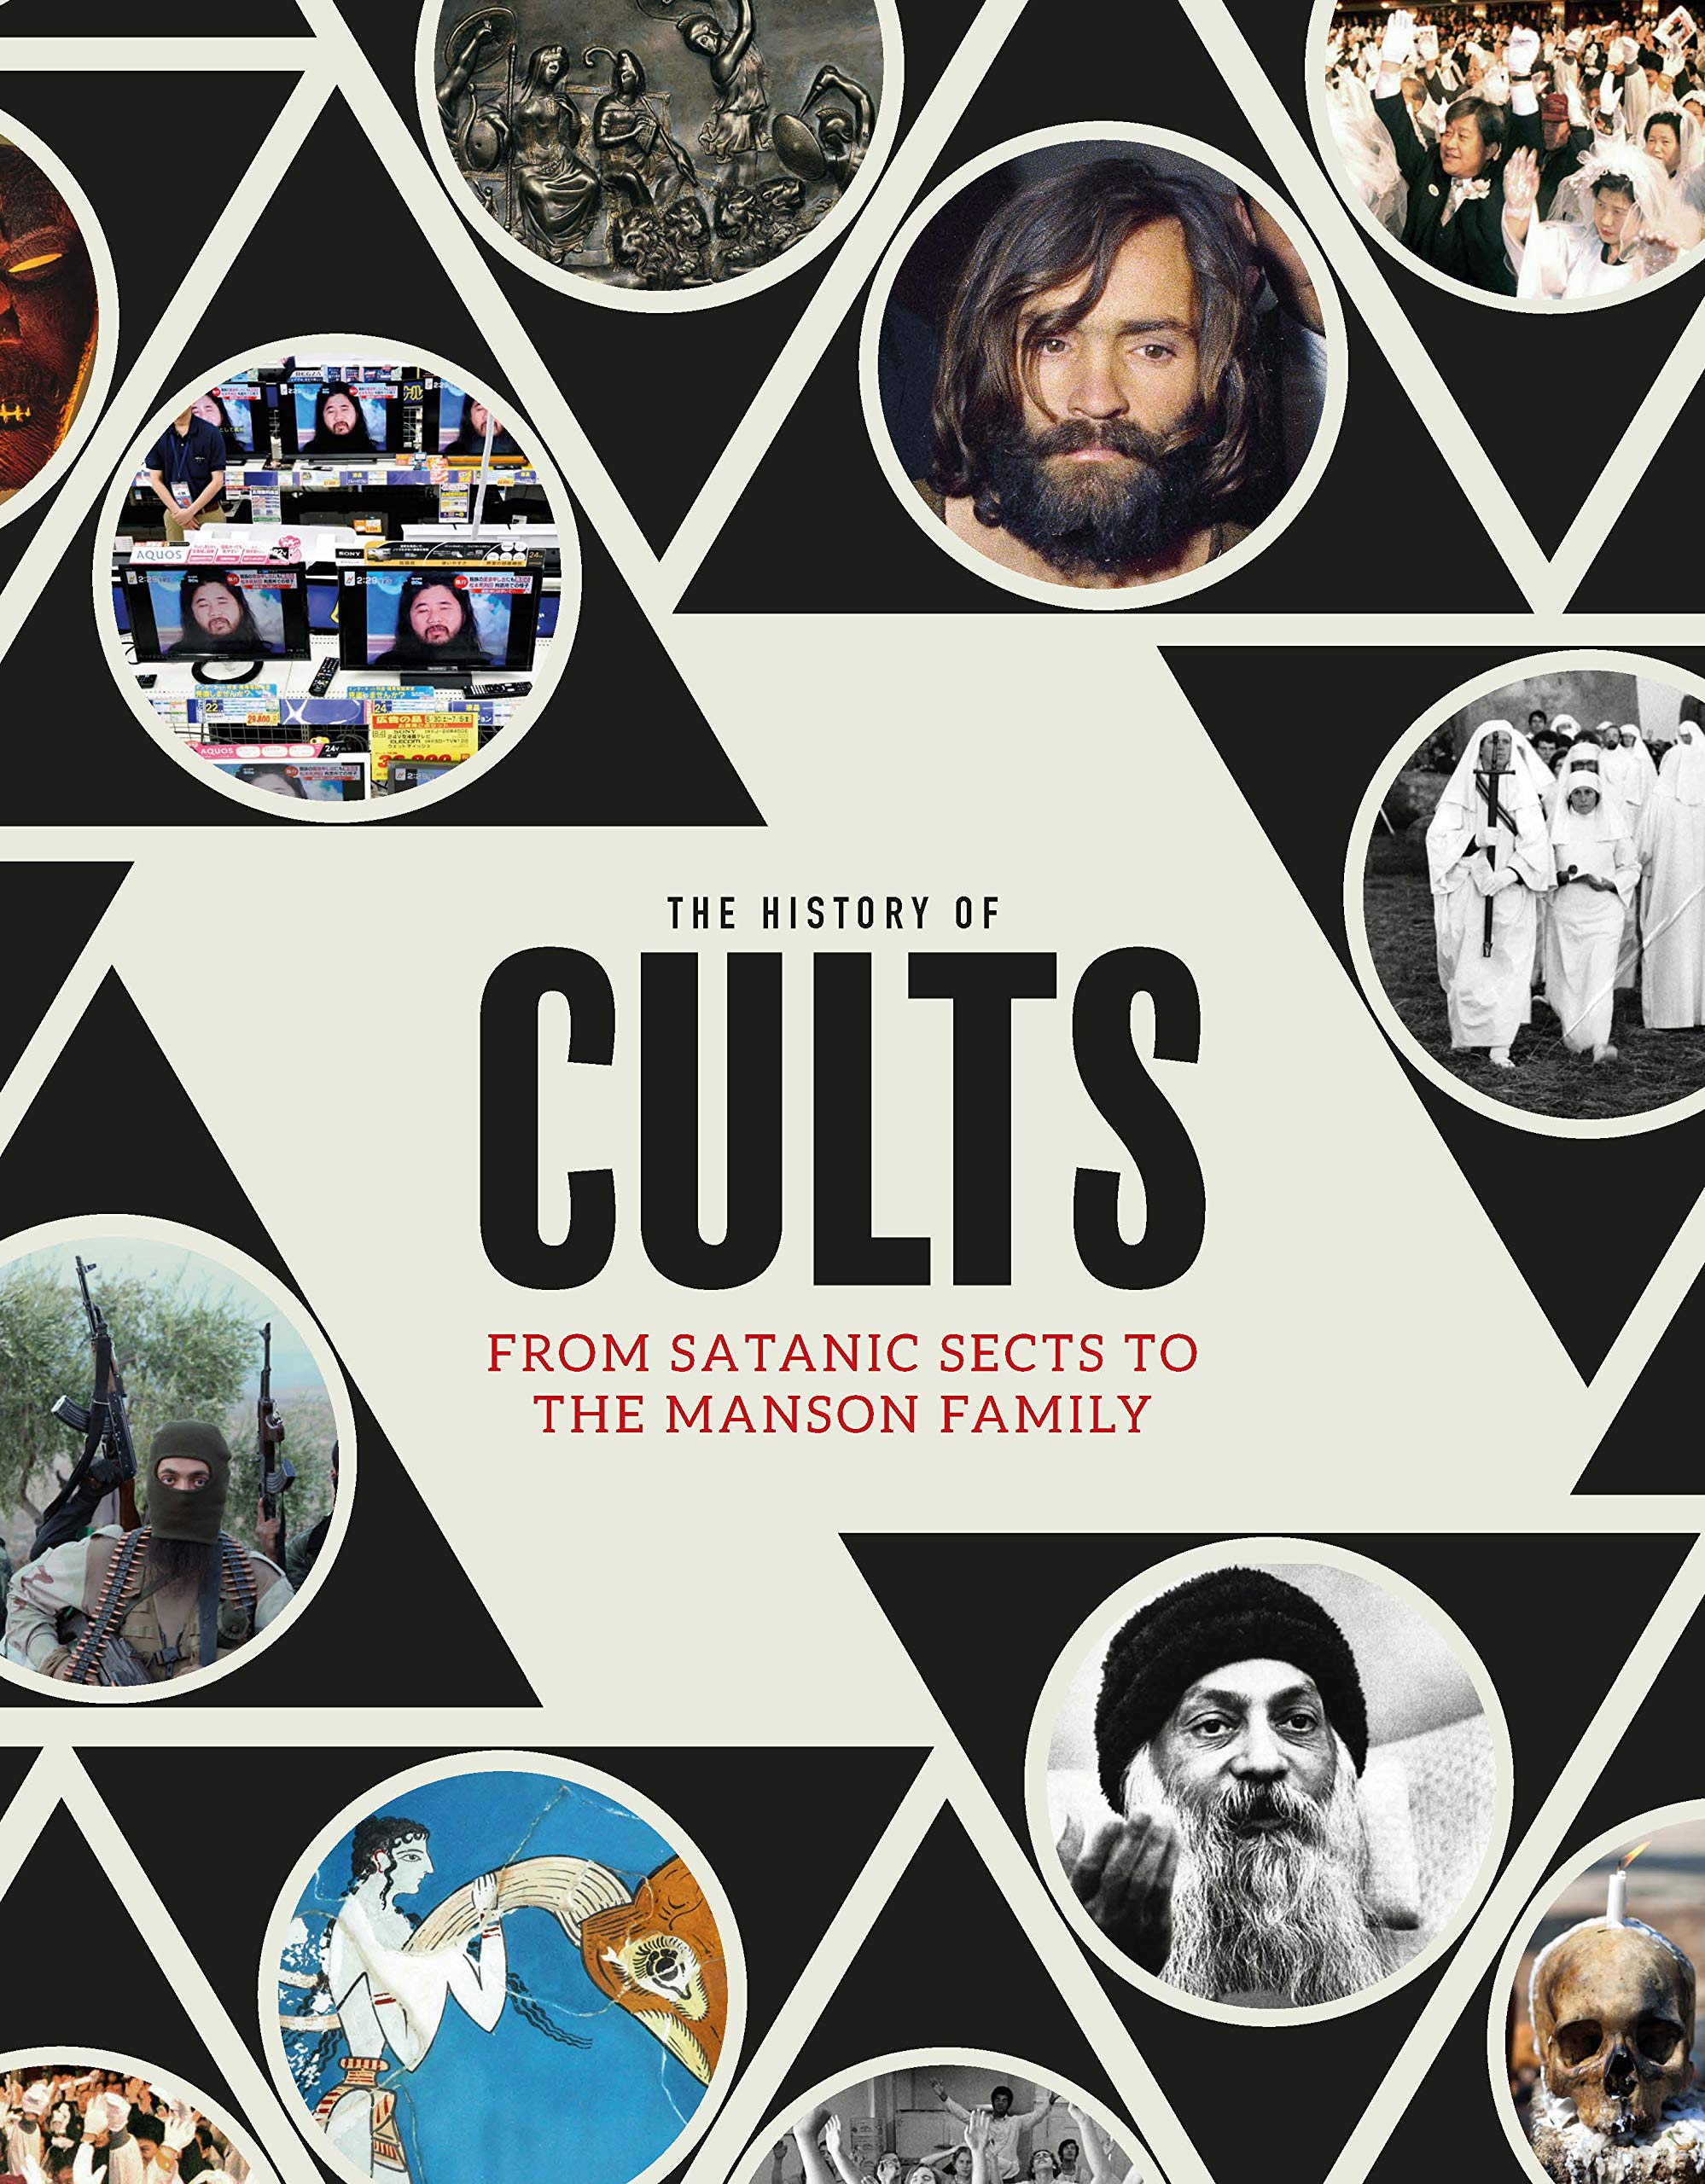 The History of Cults